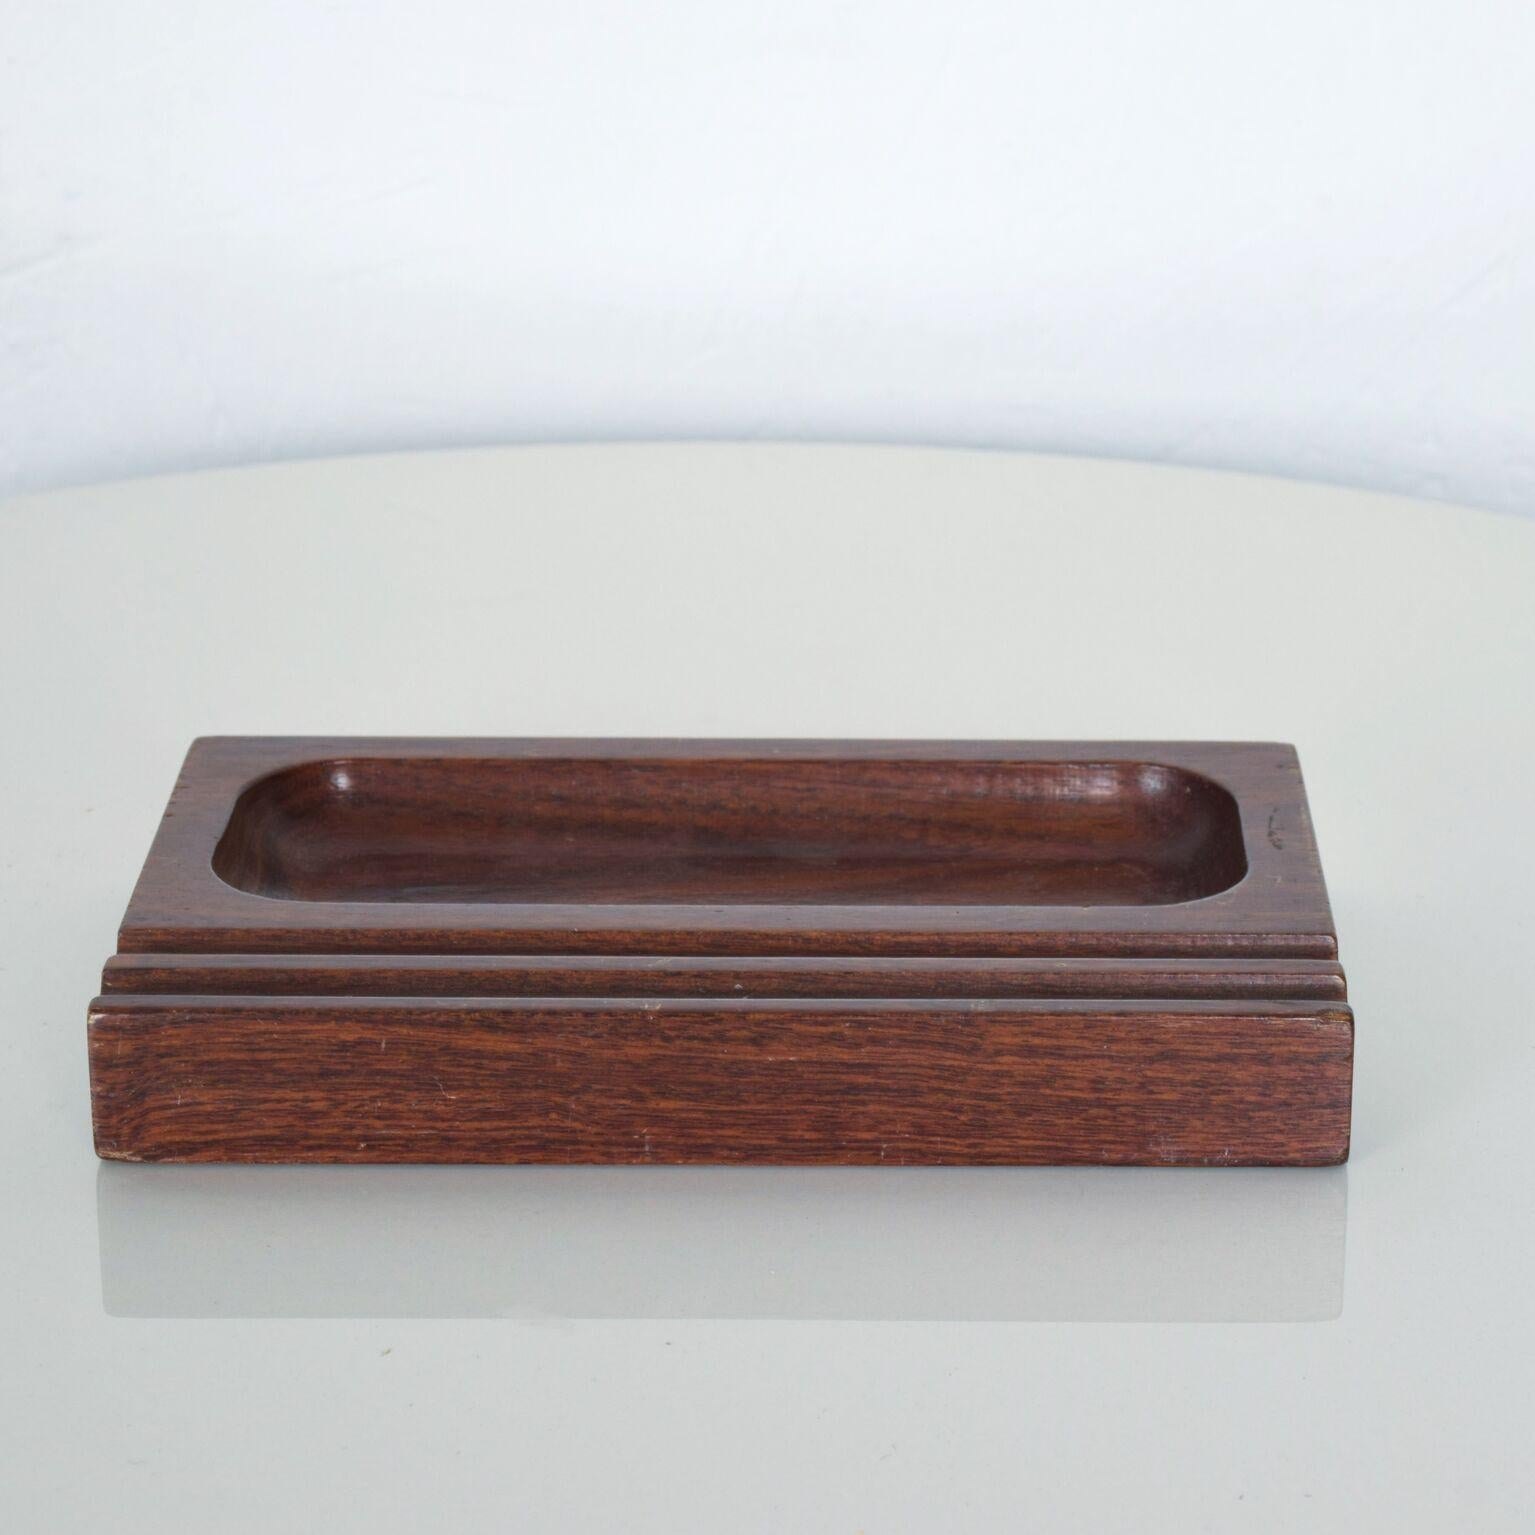 For your pleasure: classy Don S Shoemaker Cocobolo wood coin pen holder desk organizer tray fine exotic cocobolo wood. Maker label stamped underneath, Don S Shoemaker, made in Mexico. Senal, circa 1960s. Dimensions: 7 1/2